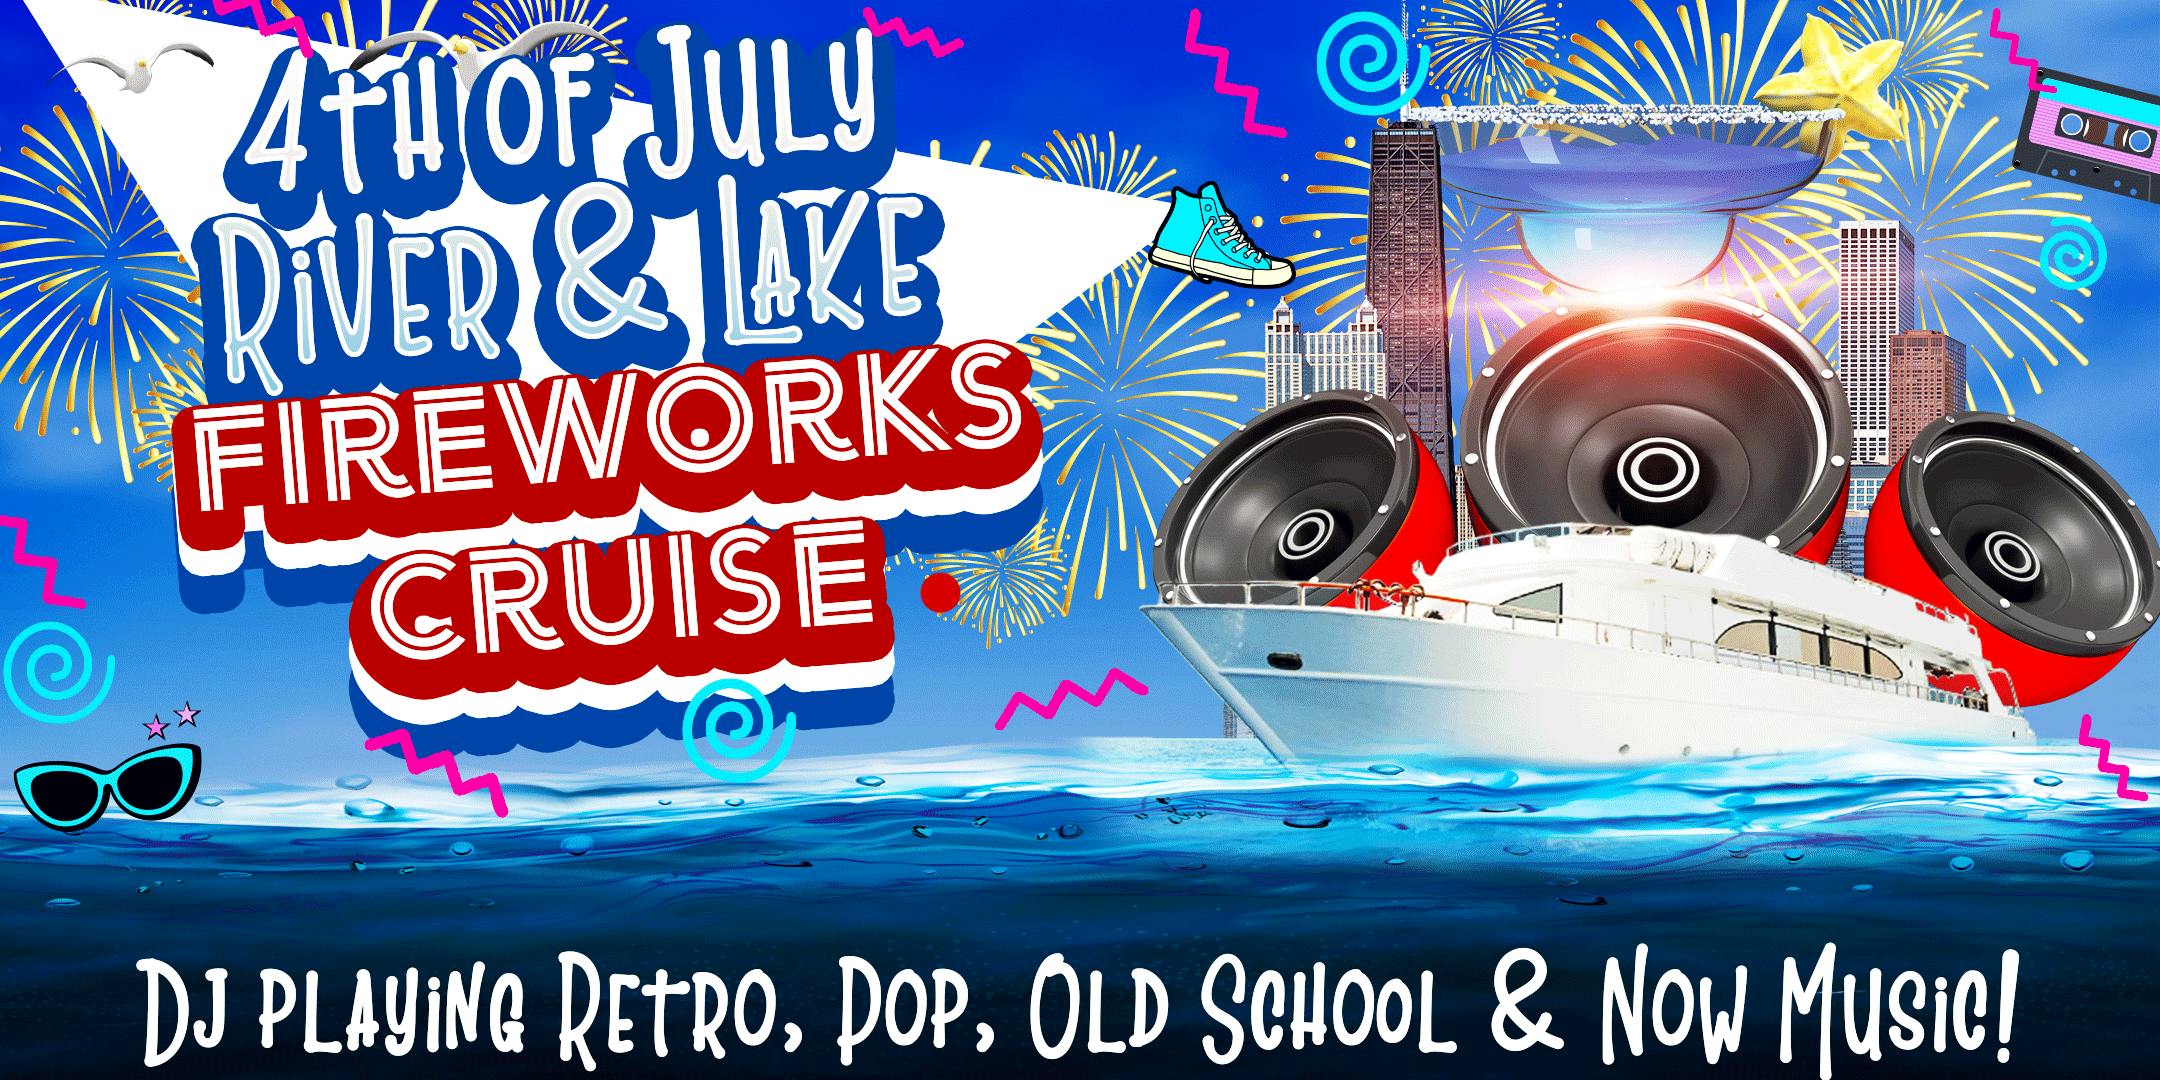 4th of July River and Lake Fireworks Cruise at Chicago Cruises